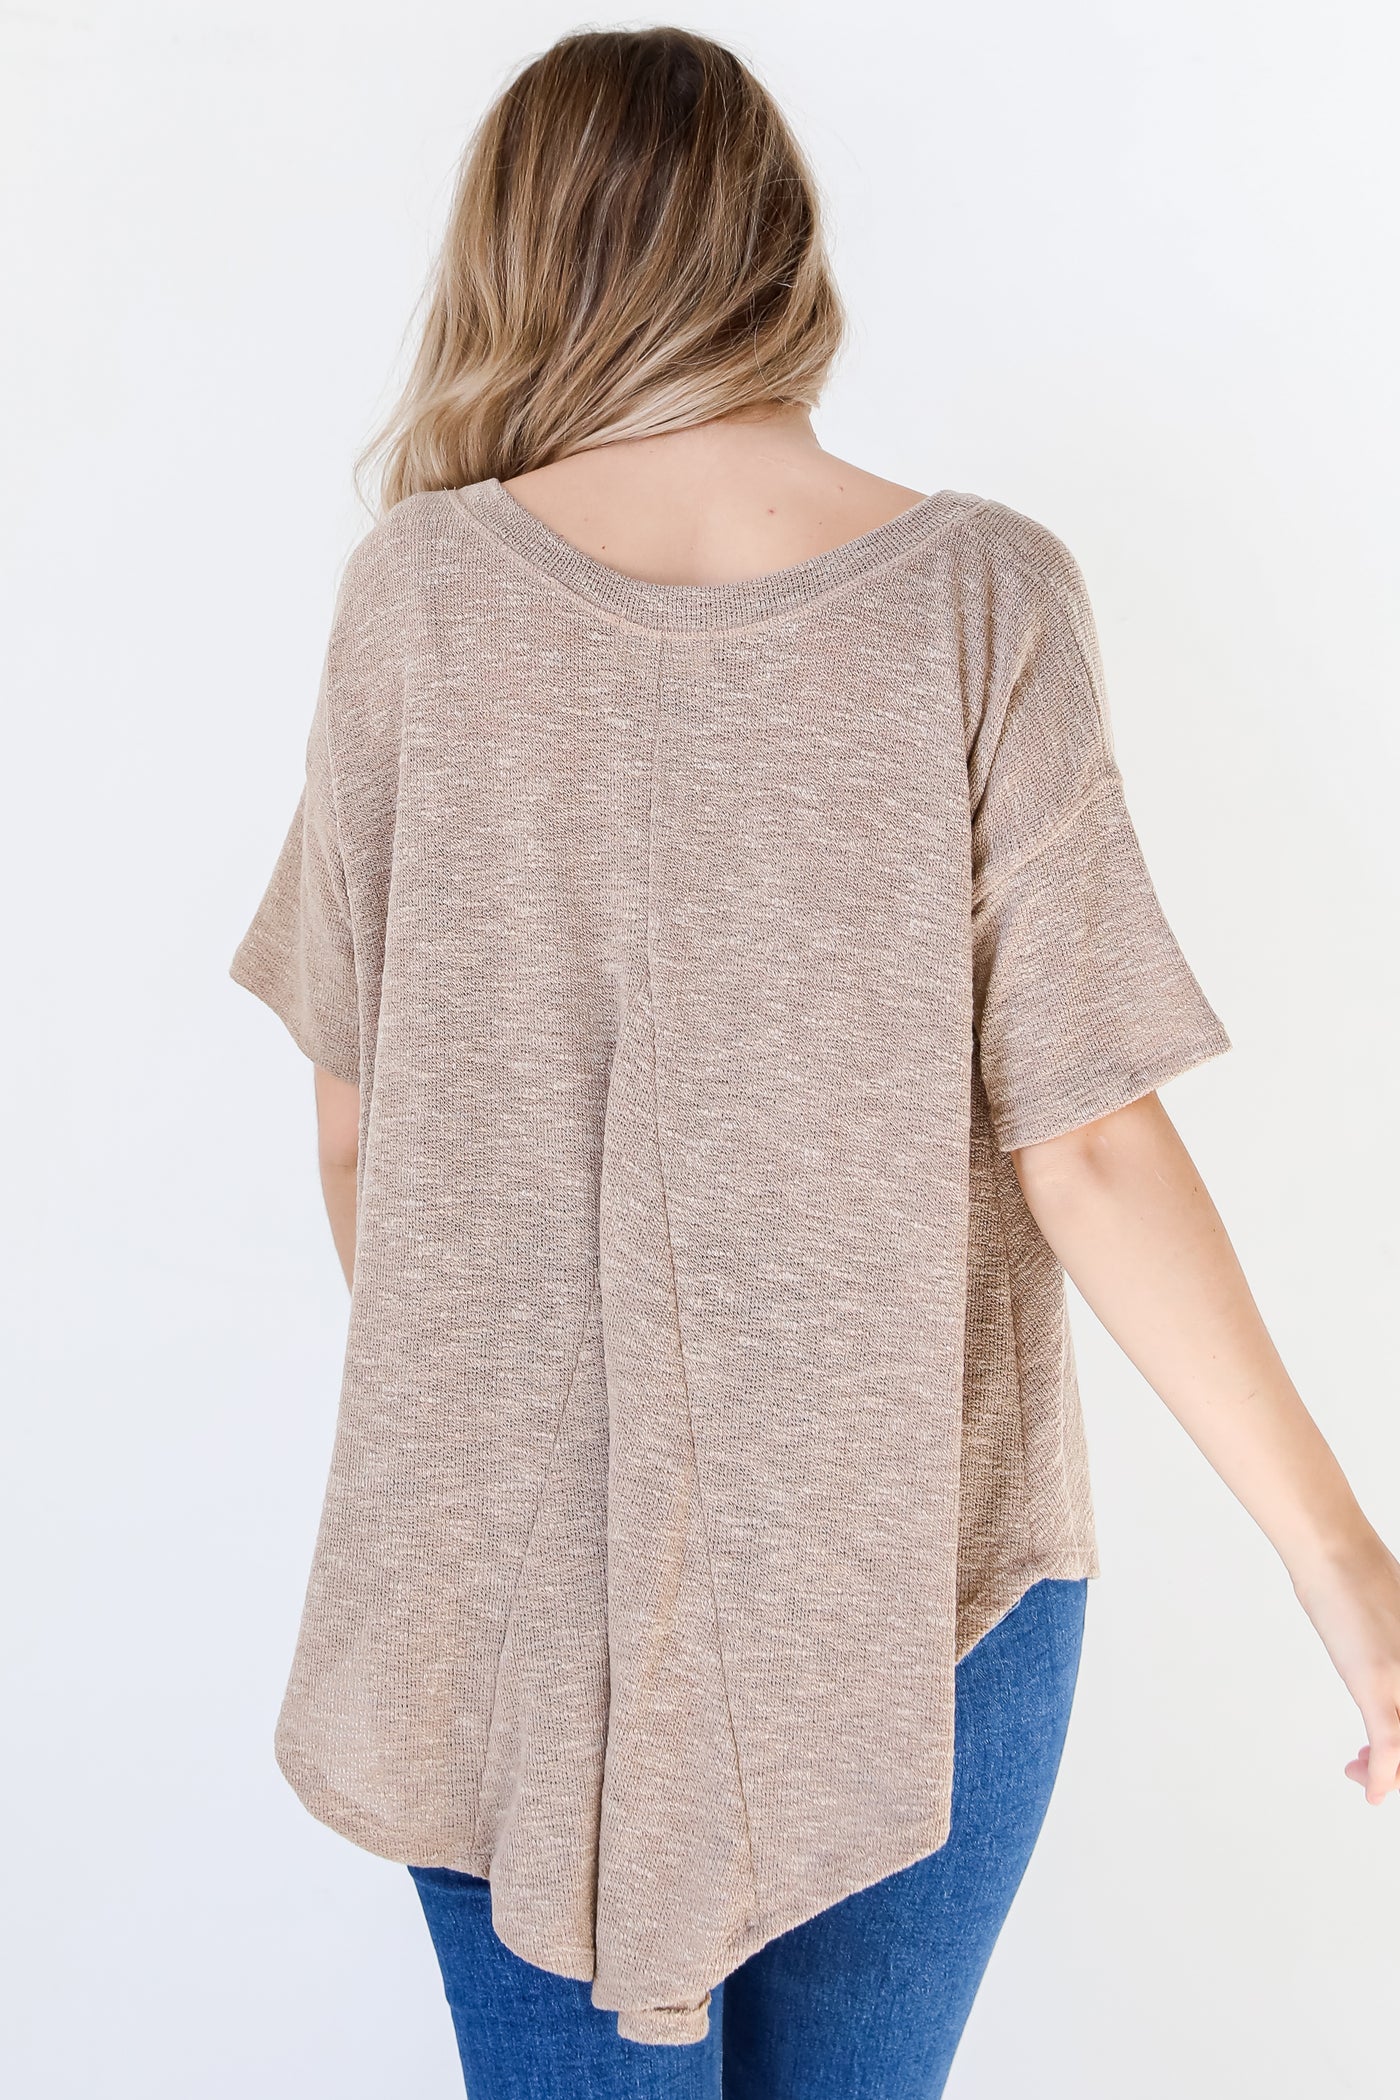 Oversized Knit Top back view